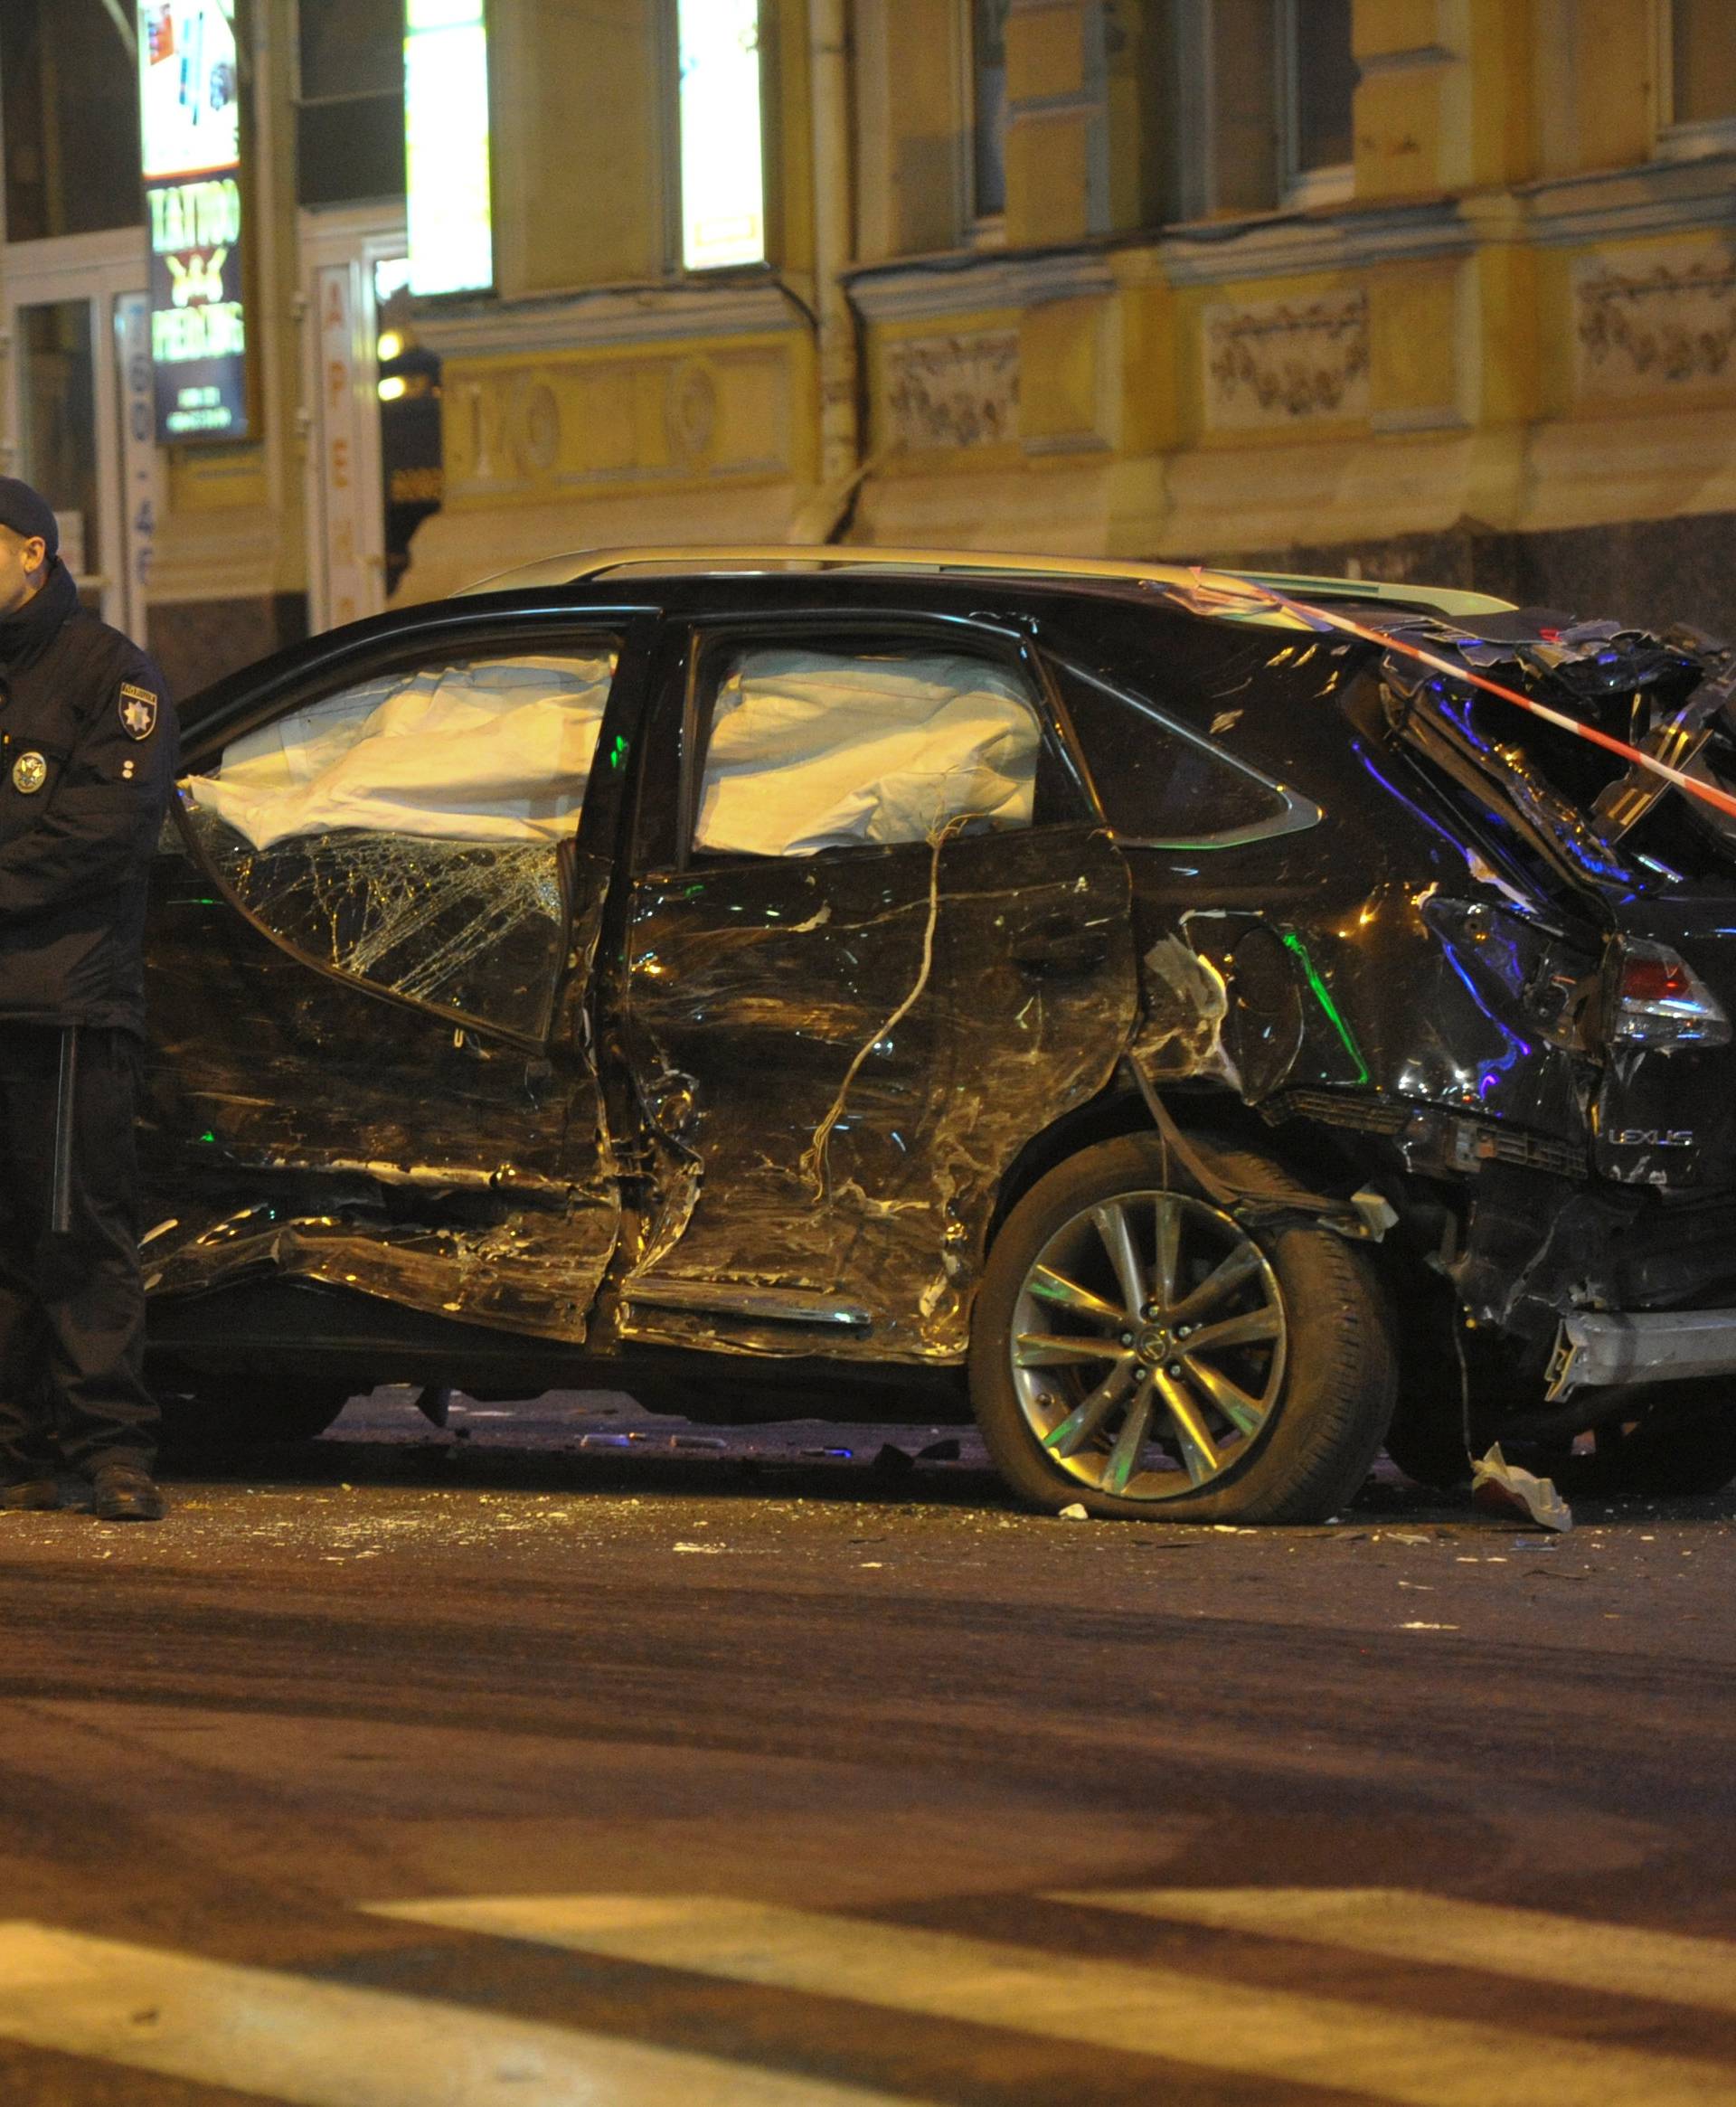 Policemen stand next to a damaged sport utility vehicle (SUV) at the accident scene after a car drove into pedestrians following a vehicle collision in central Kharkiv